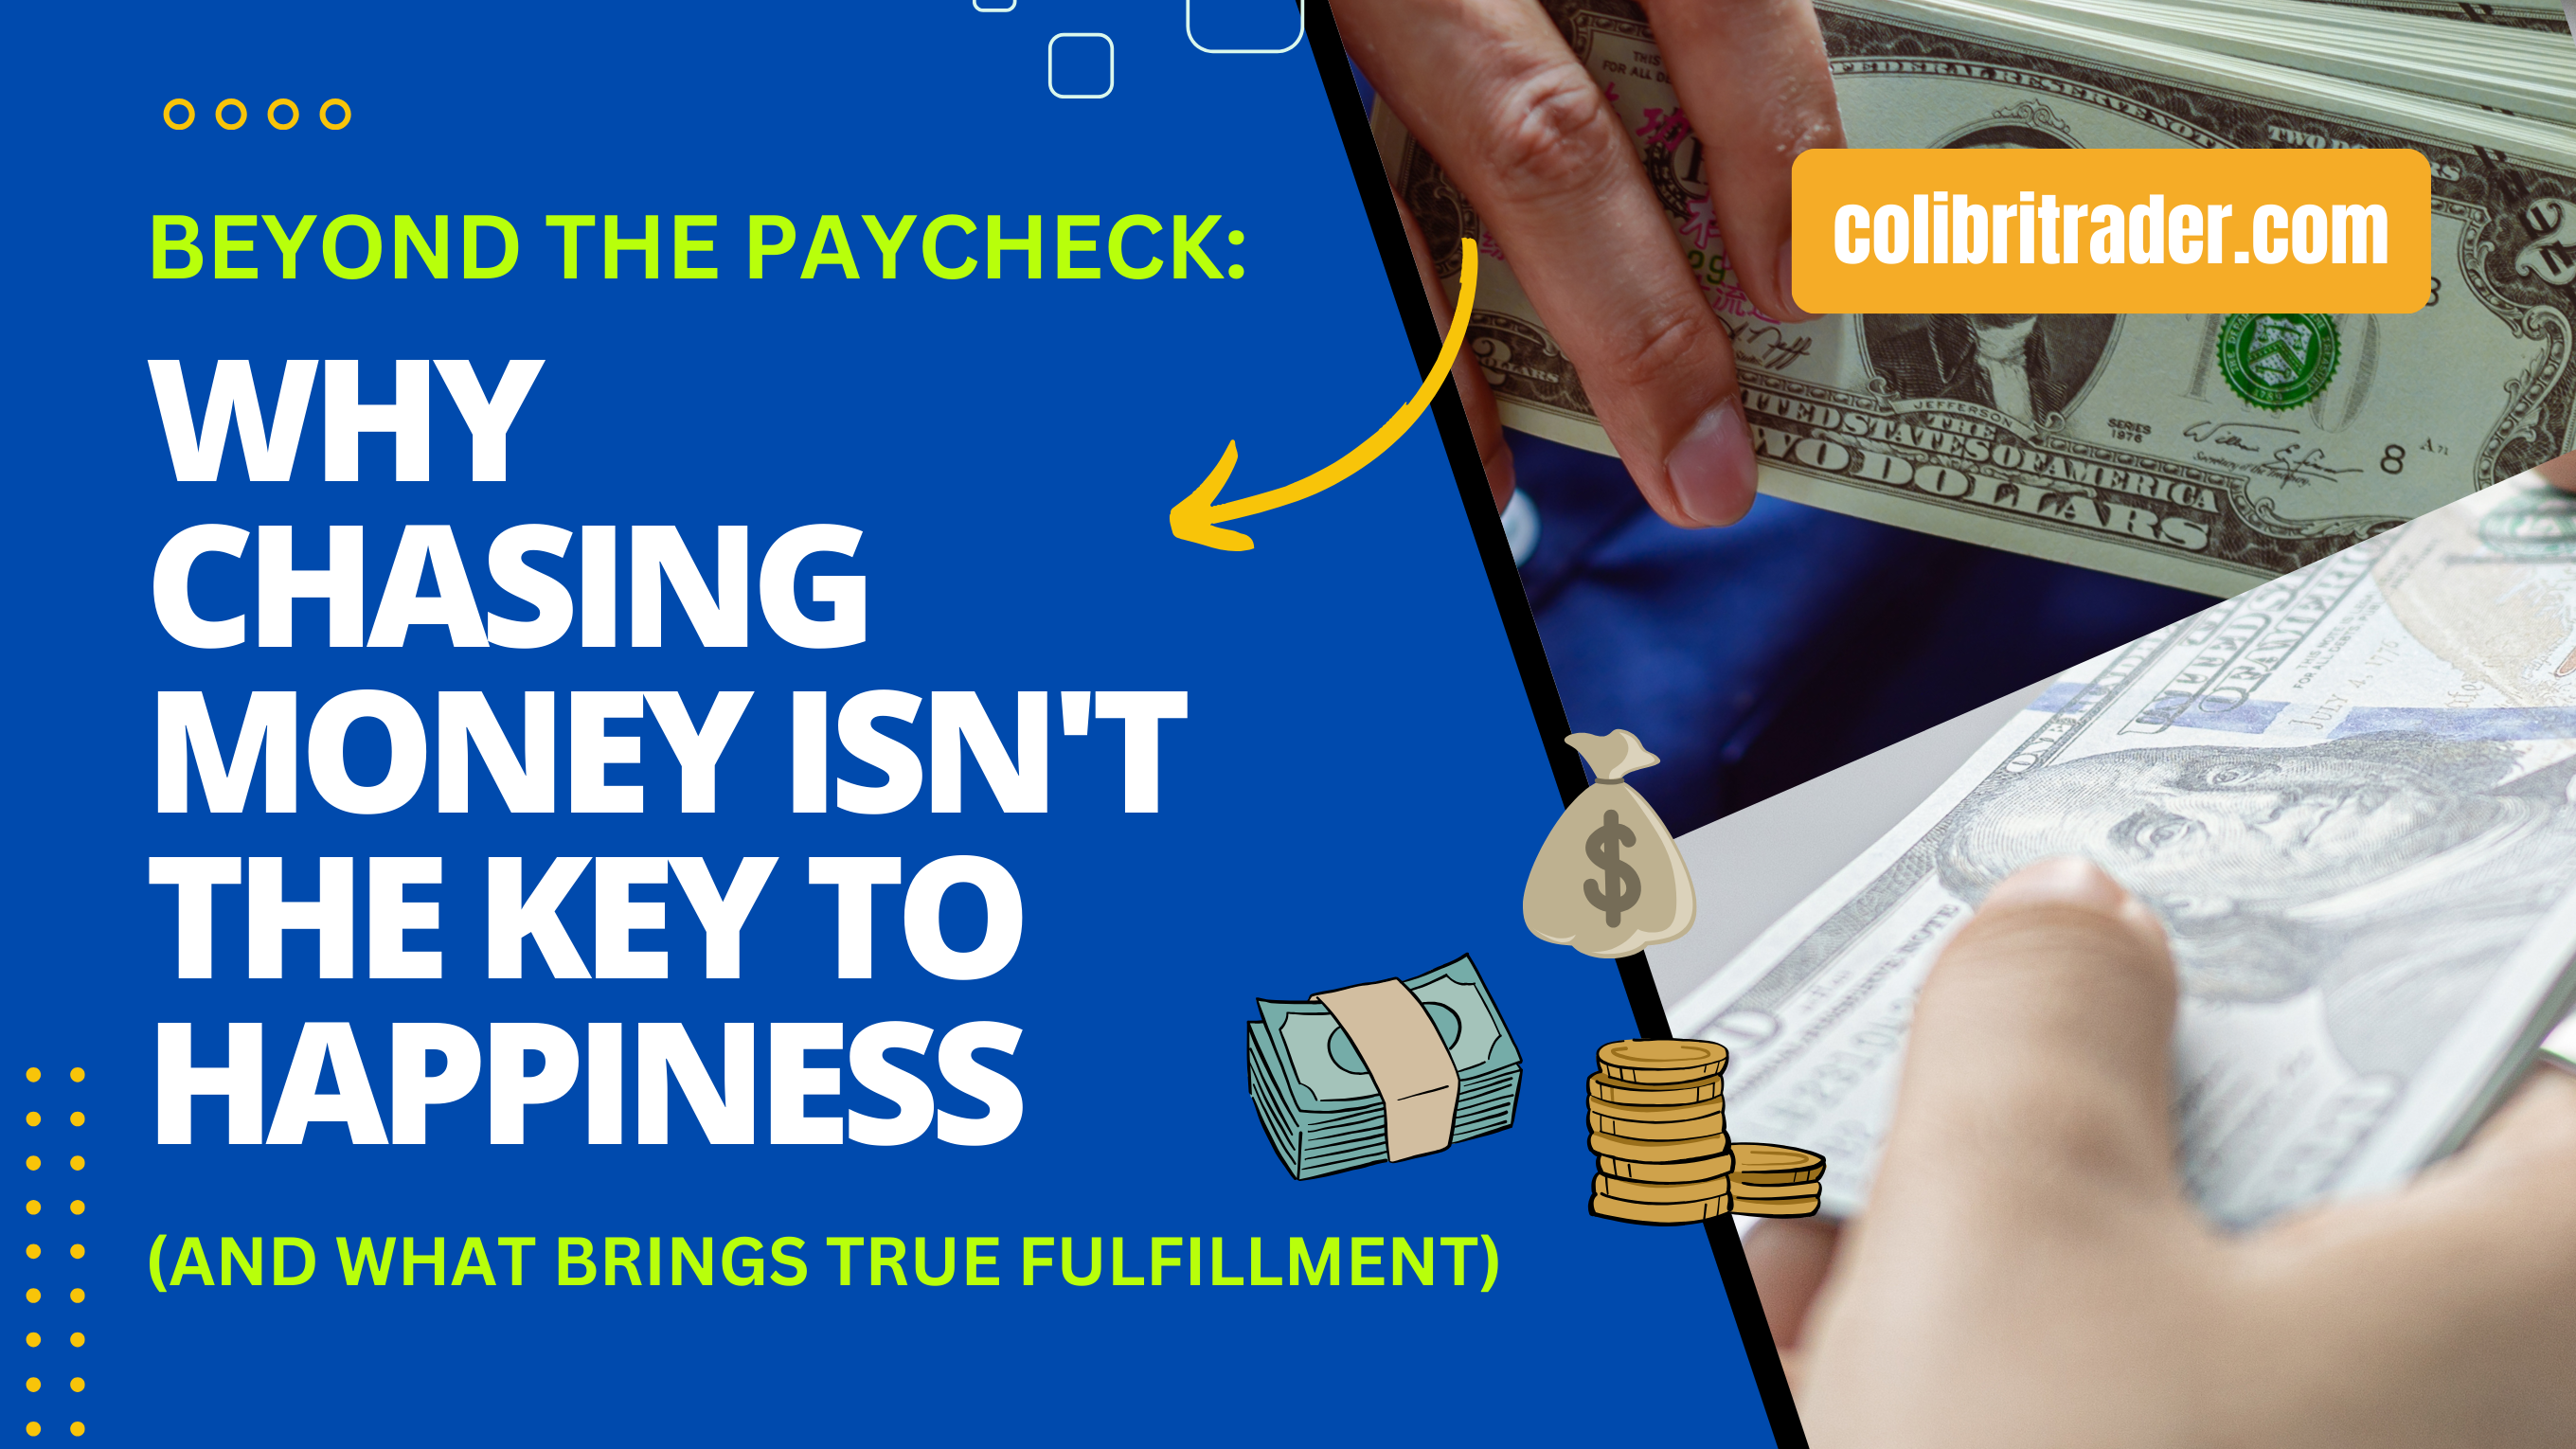 Beyond the Paycheck: Why Chasing Money Isn't the Key to Happiness (and What Brings True Fulfillment)